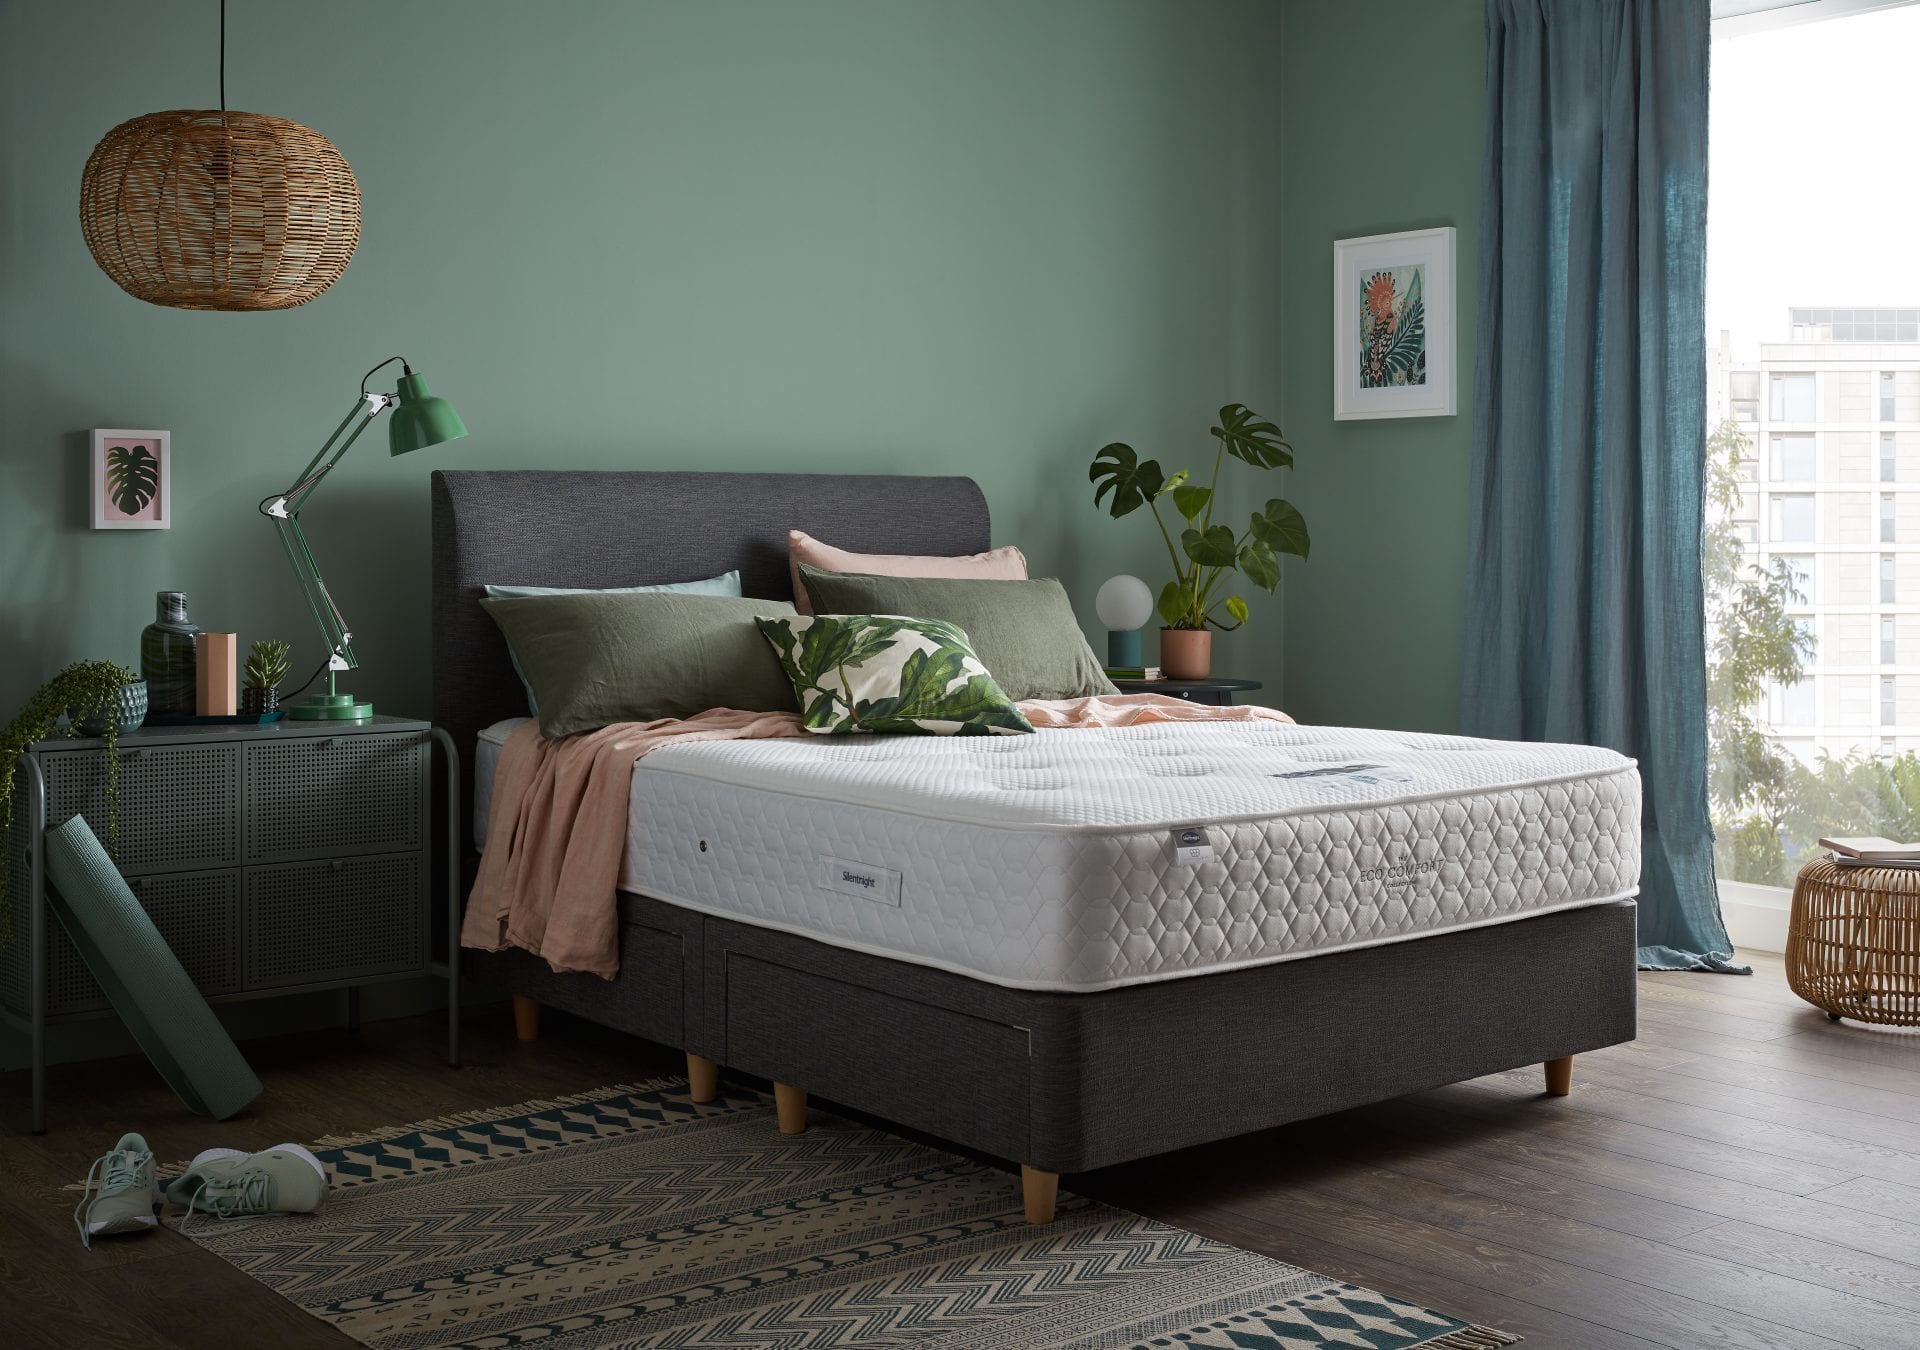 grey bed and white mattress in a green bedroom